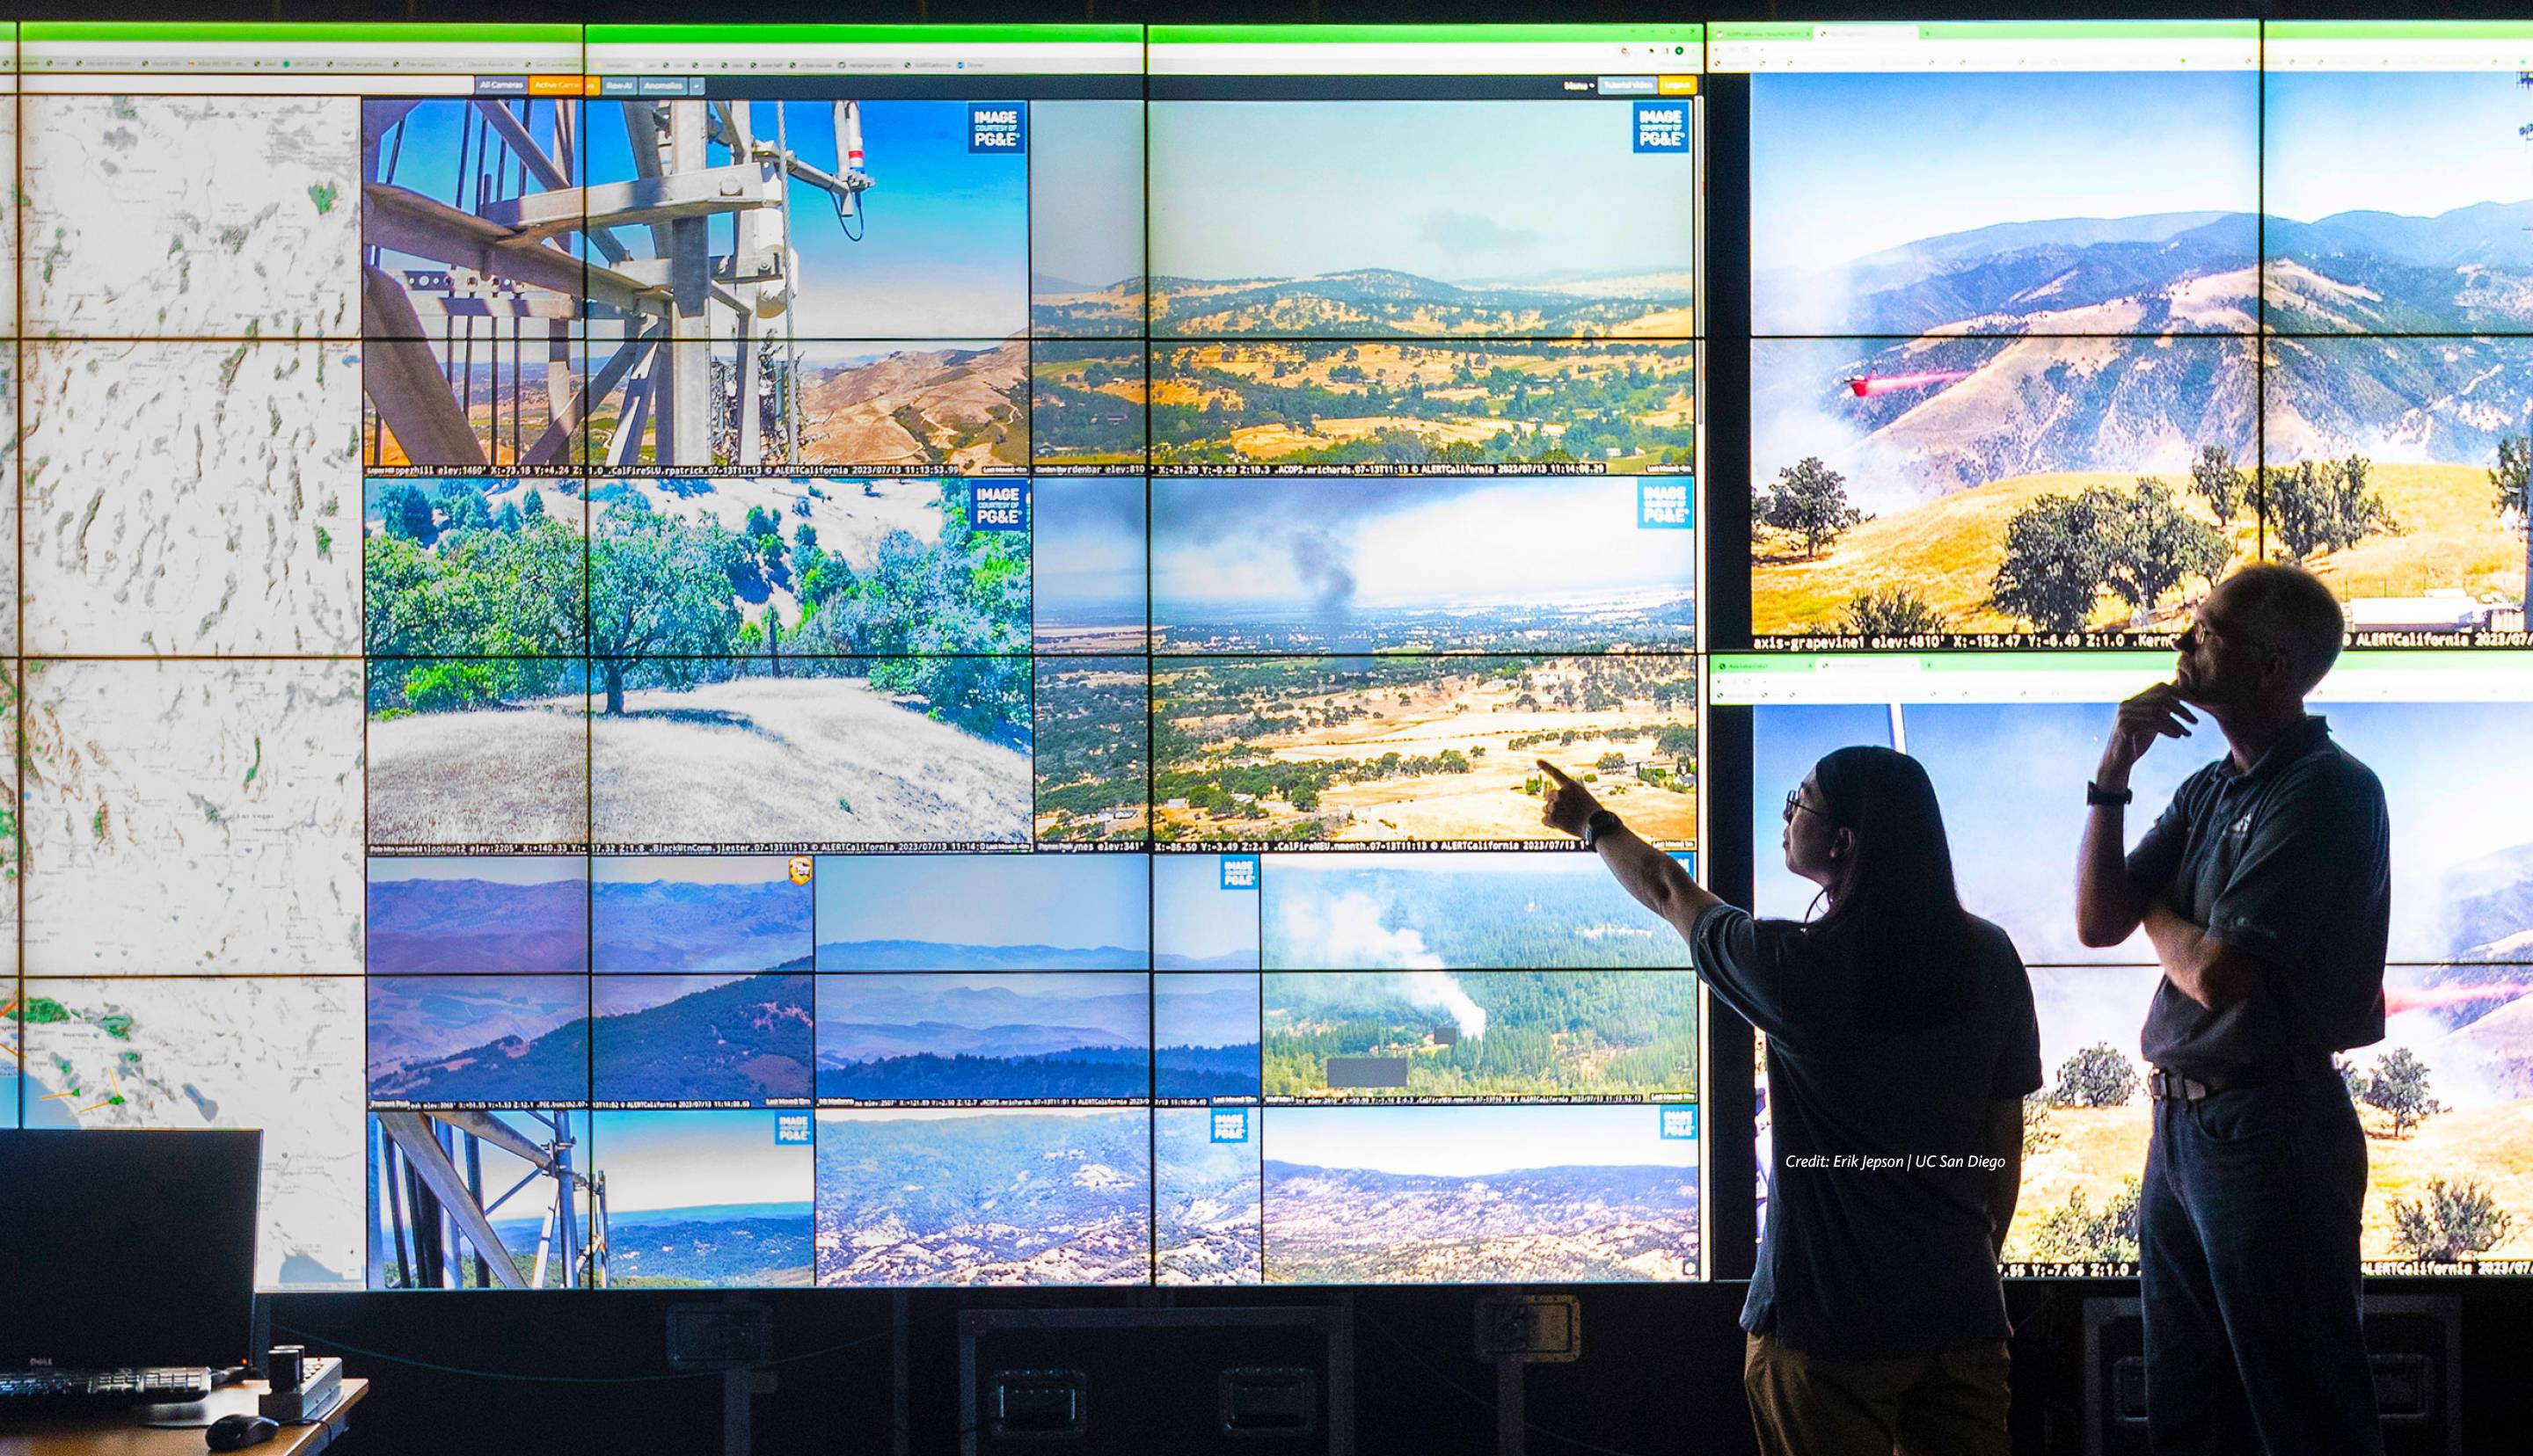 Two people stand in front of a wall of screens showing footage of California landscapes